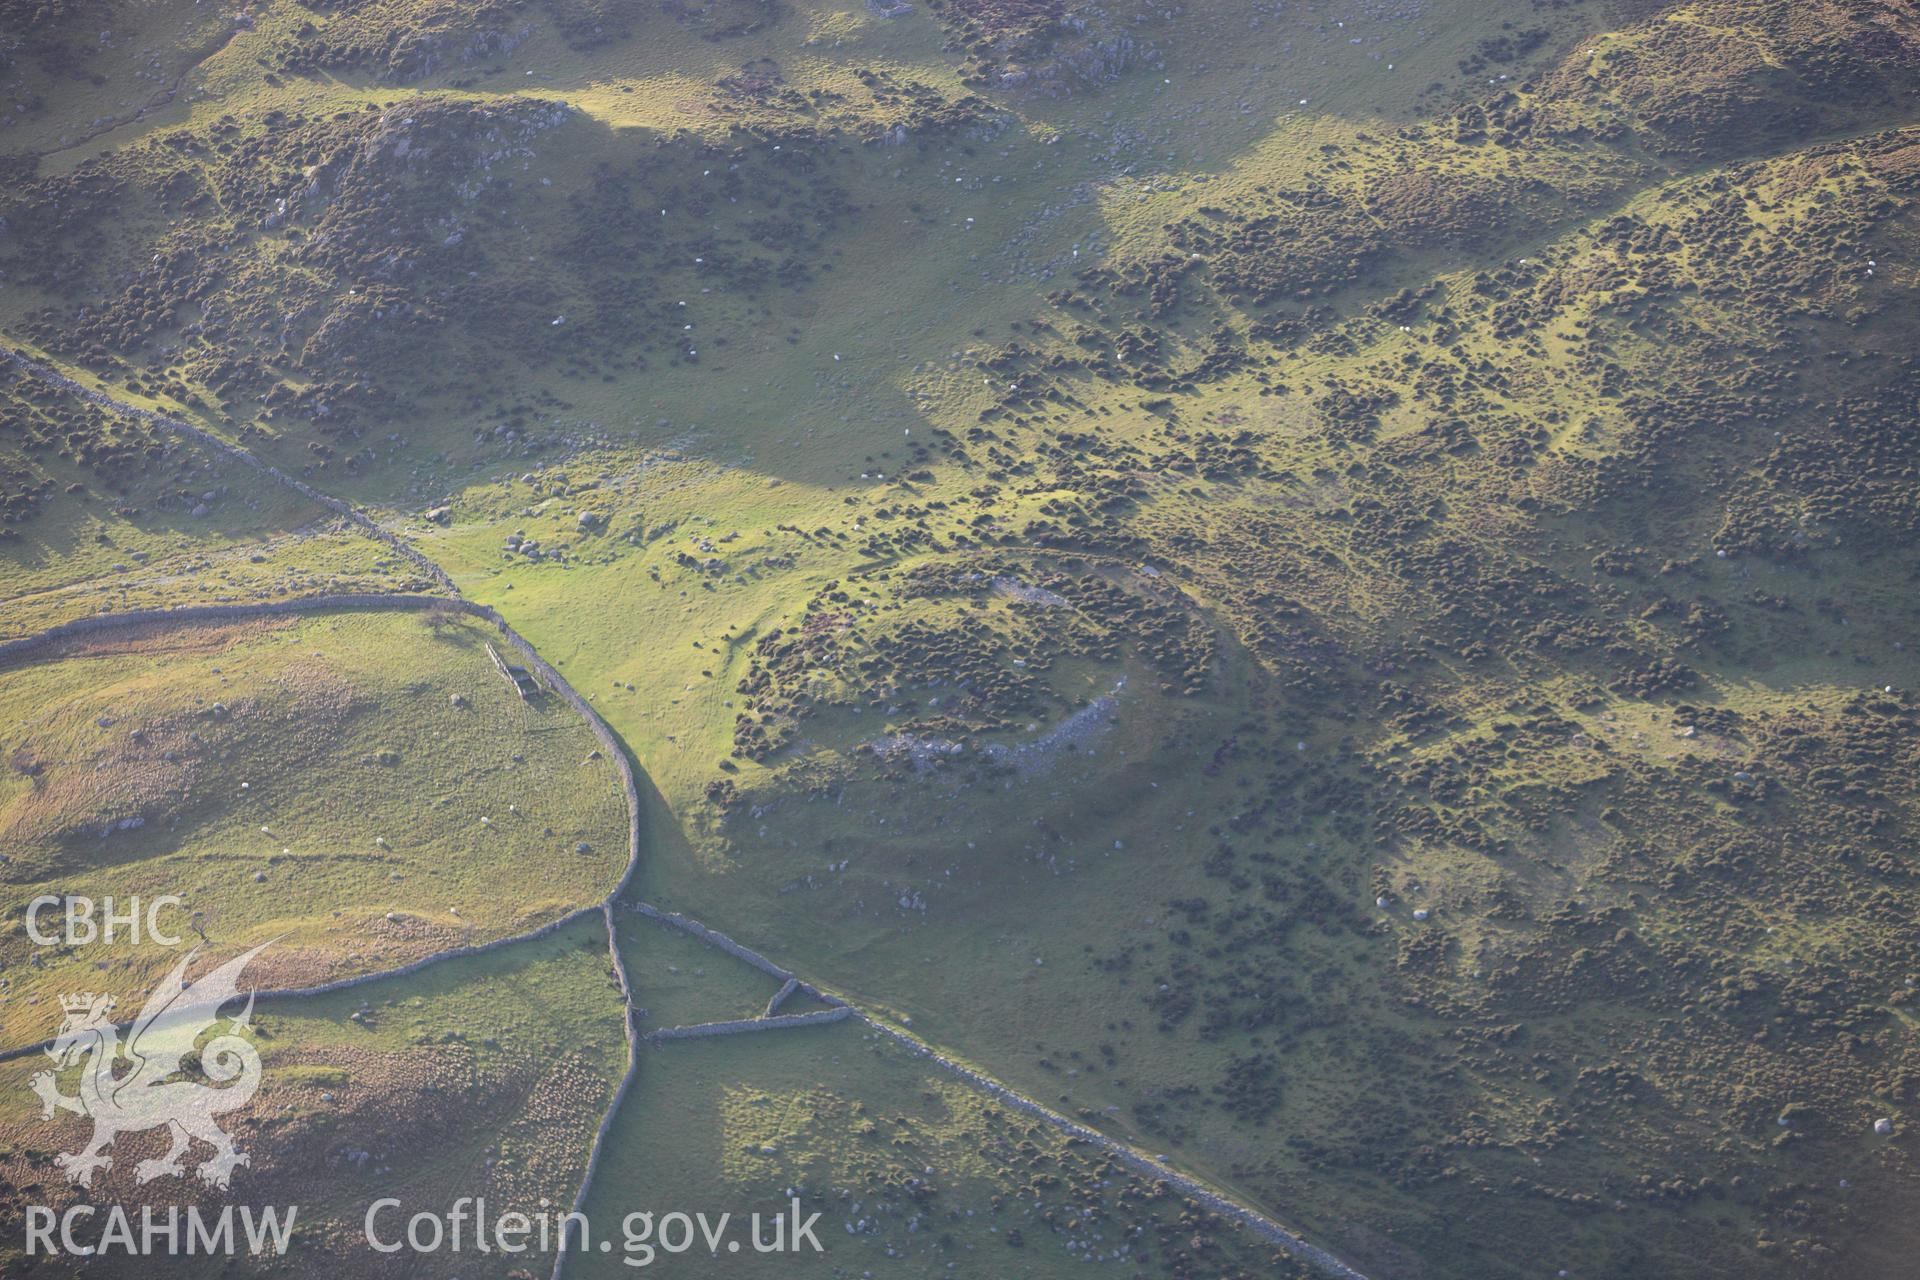 RCAHMW colour oblique aerial photograph of Caer Bach Hillfort. Taken on 10 December 2009 by Toby Driver